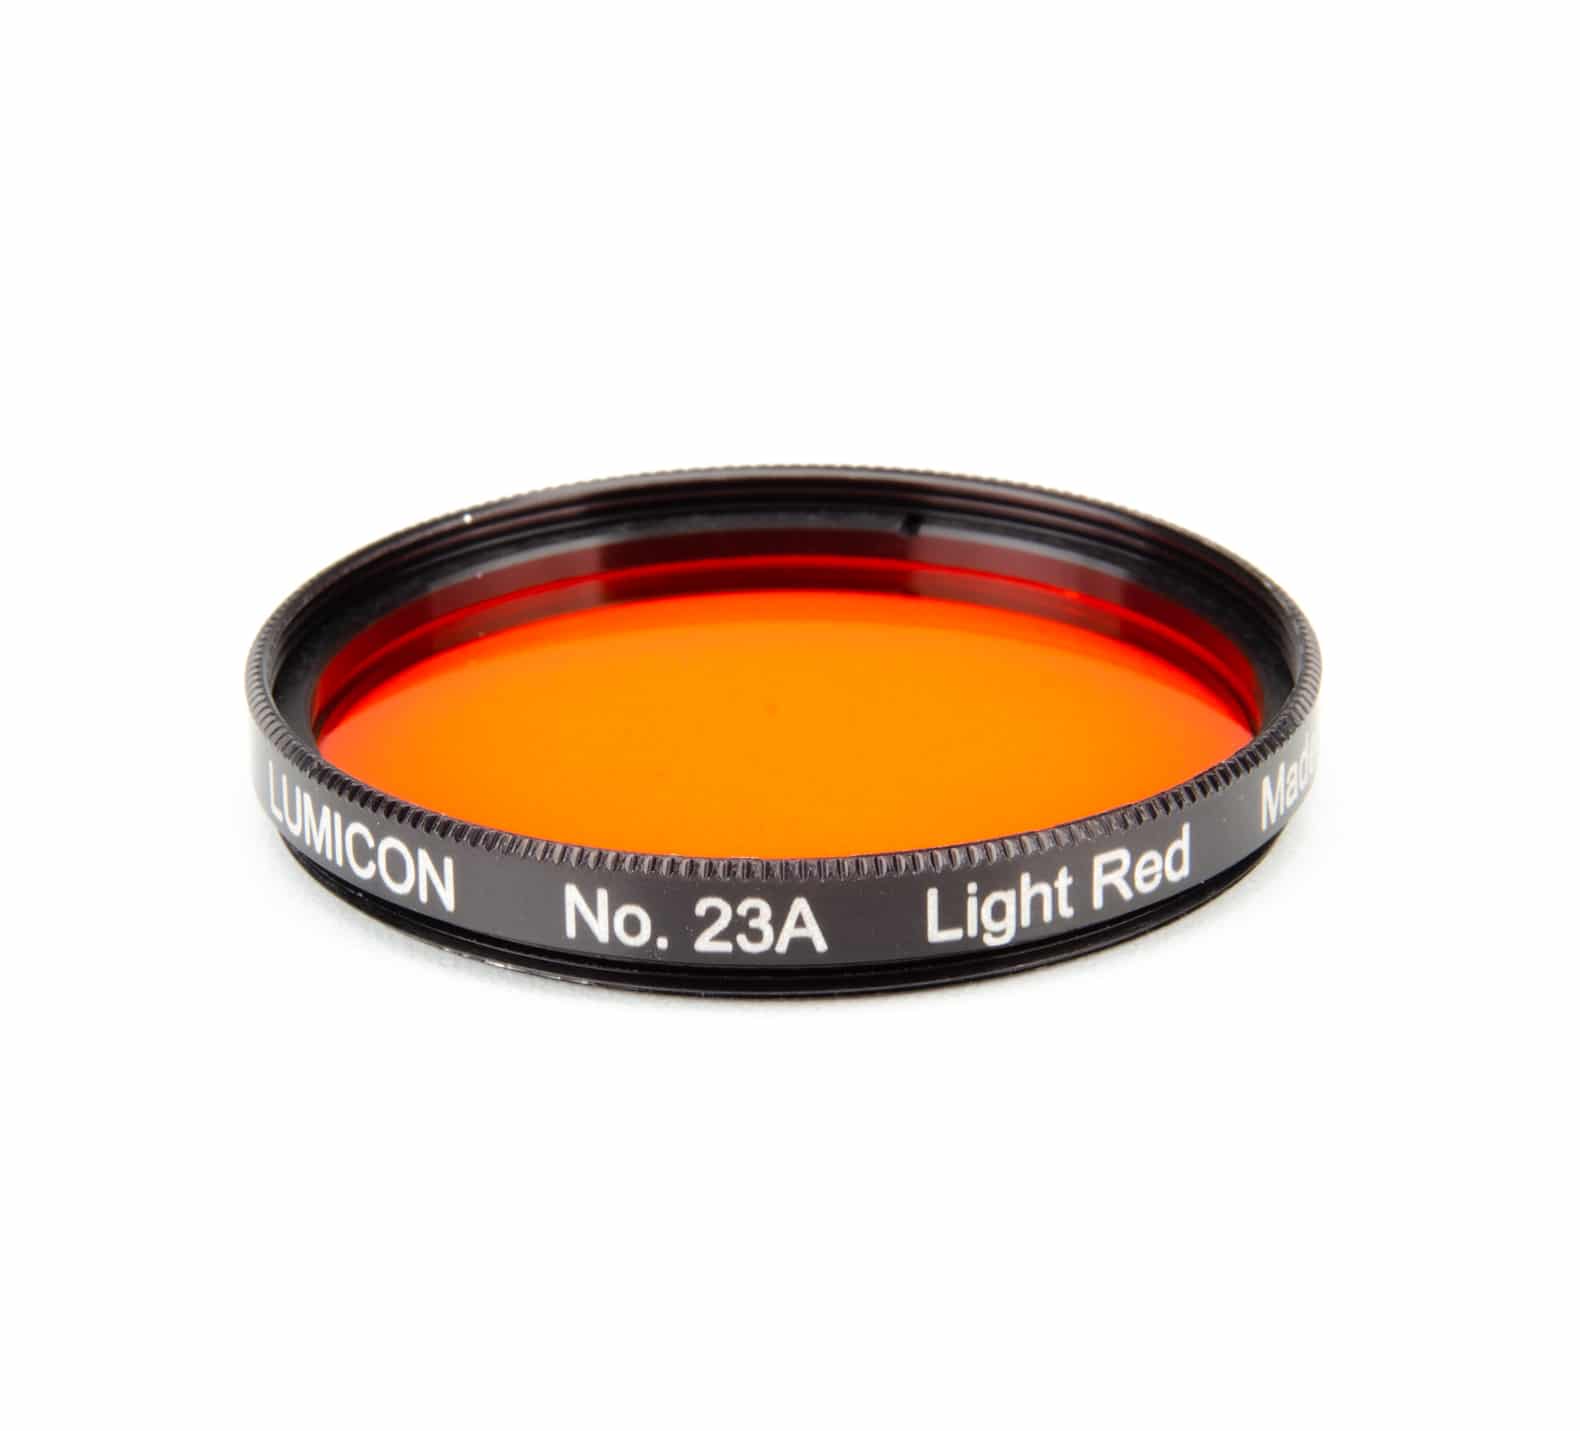 2 # LF2035 Lumicon Color/Planetary Filter #23A Light Red